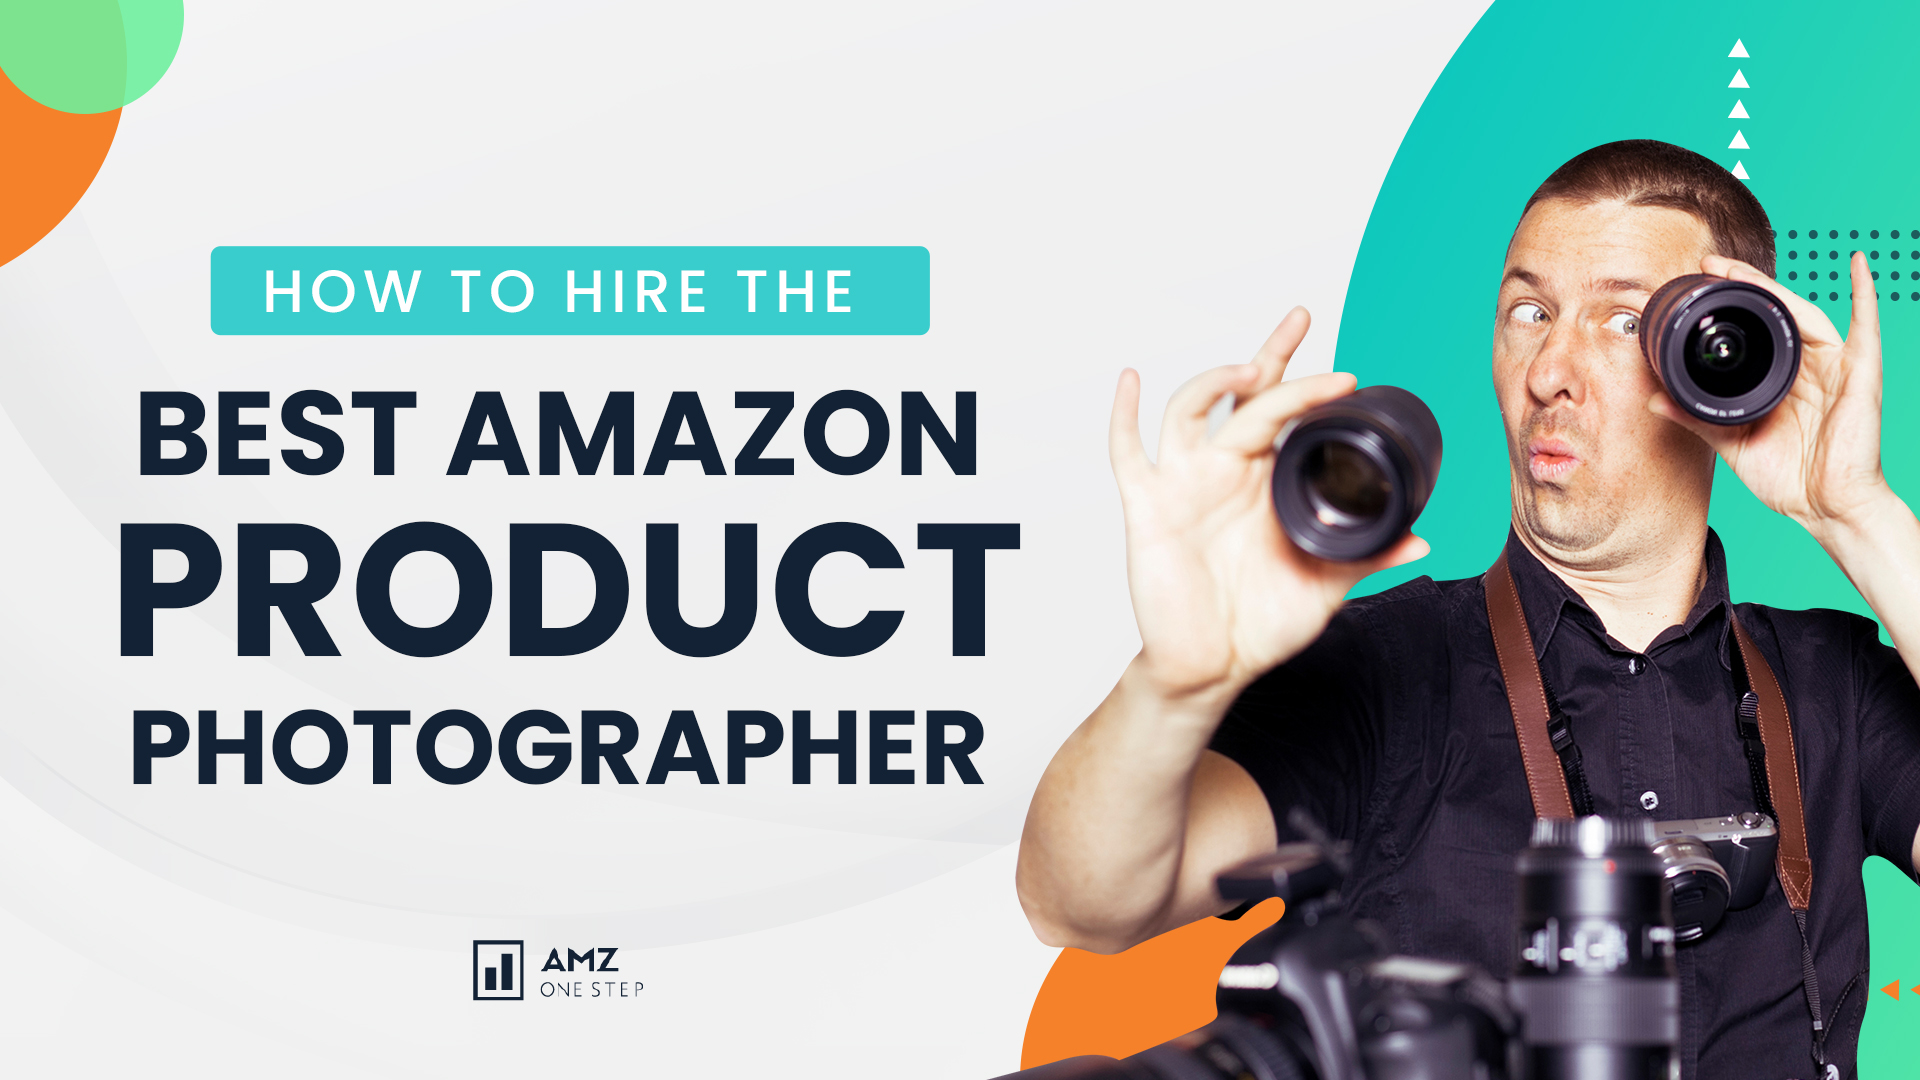 How to Hire the Best Amazon Product Photographer